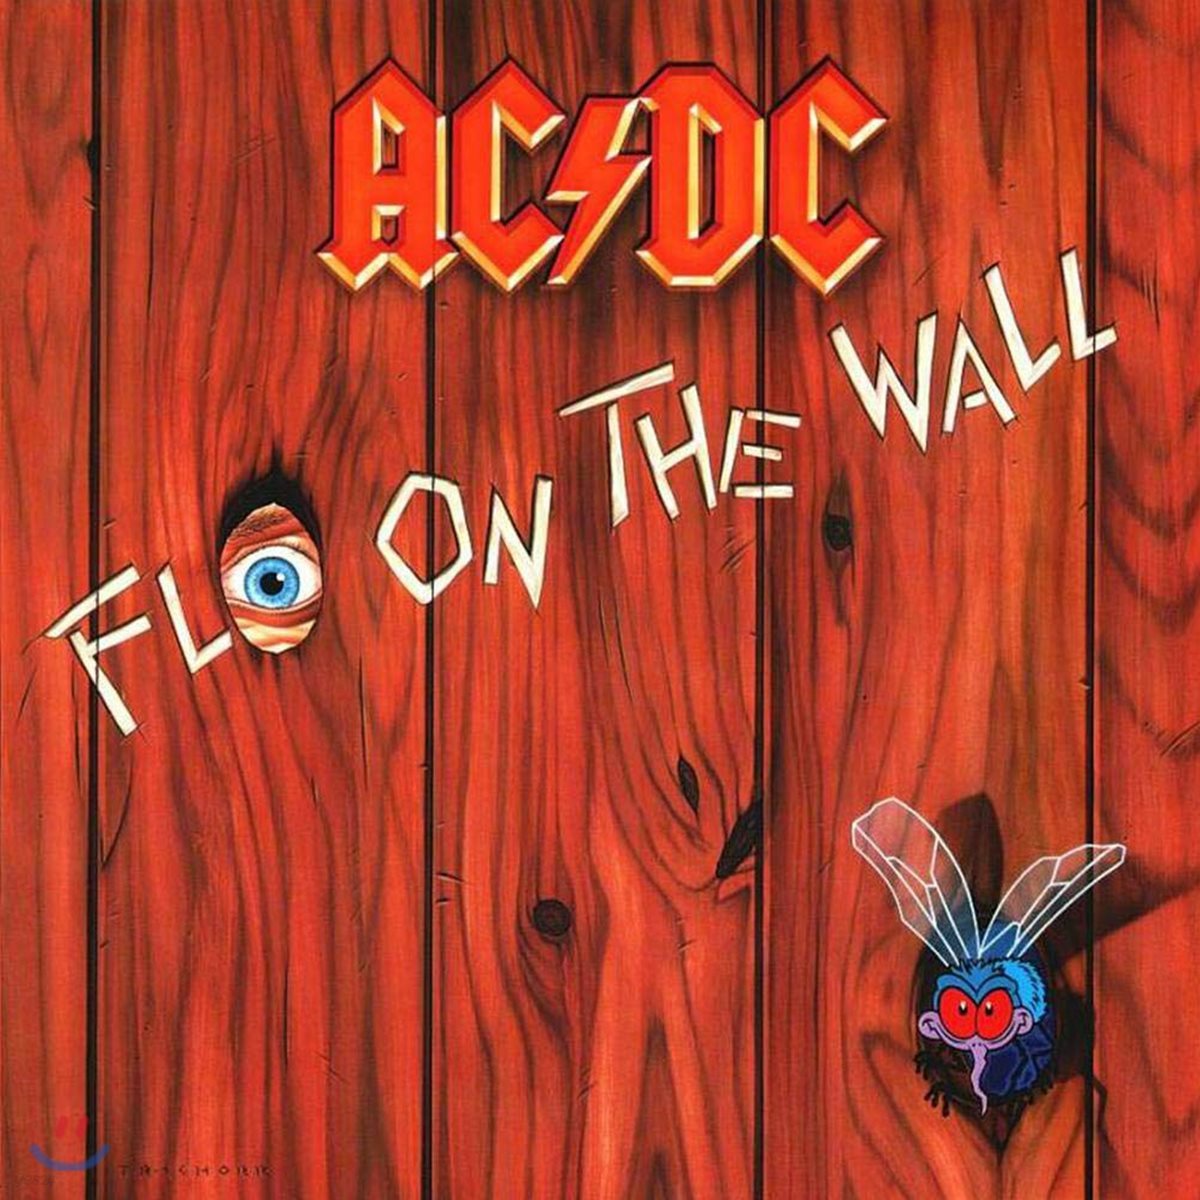 AC/DC (에이씨디씨) - Fly On The Wall [LP]